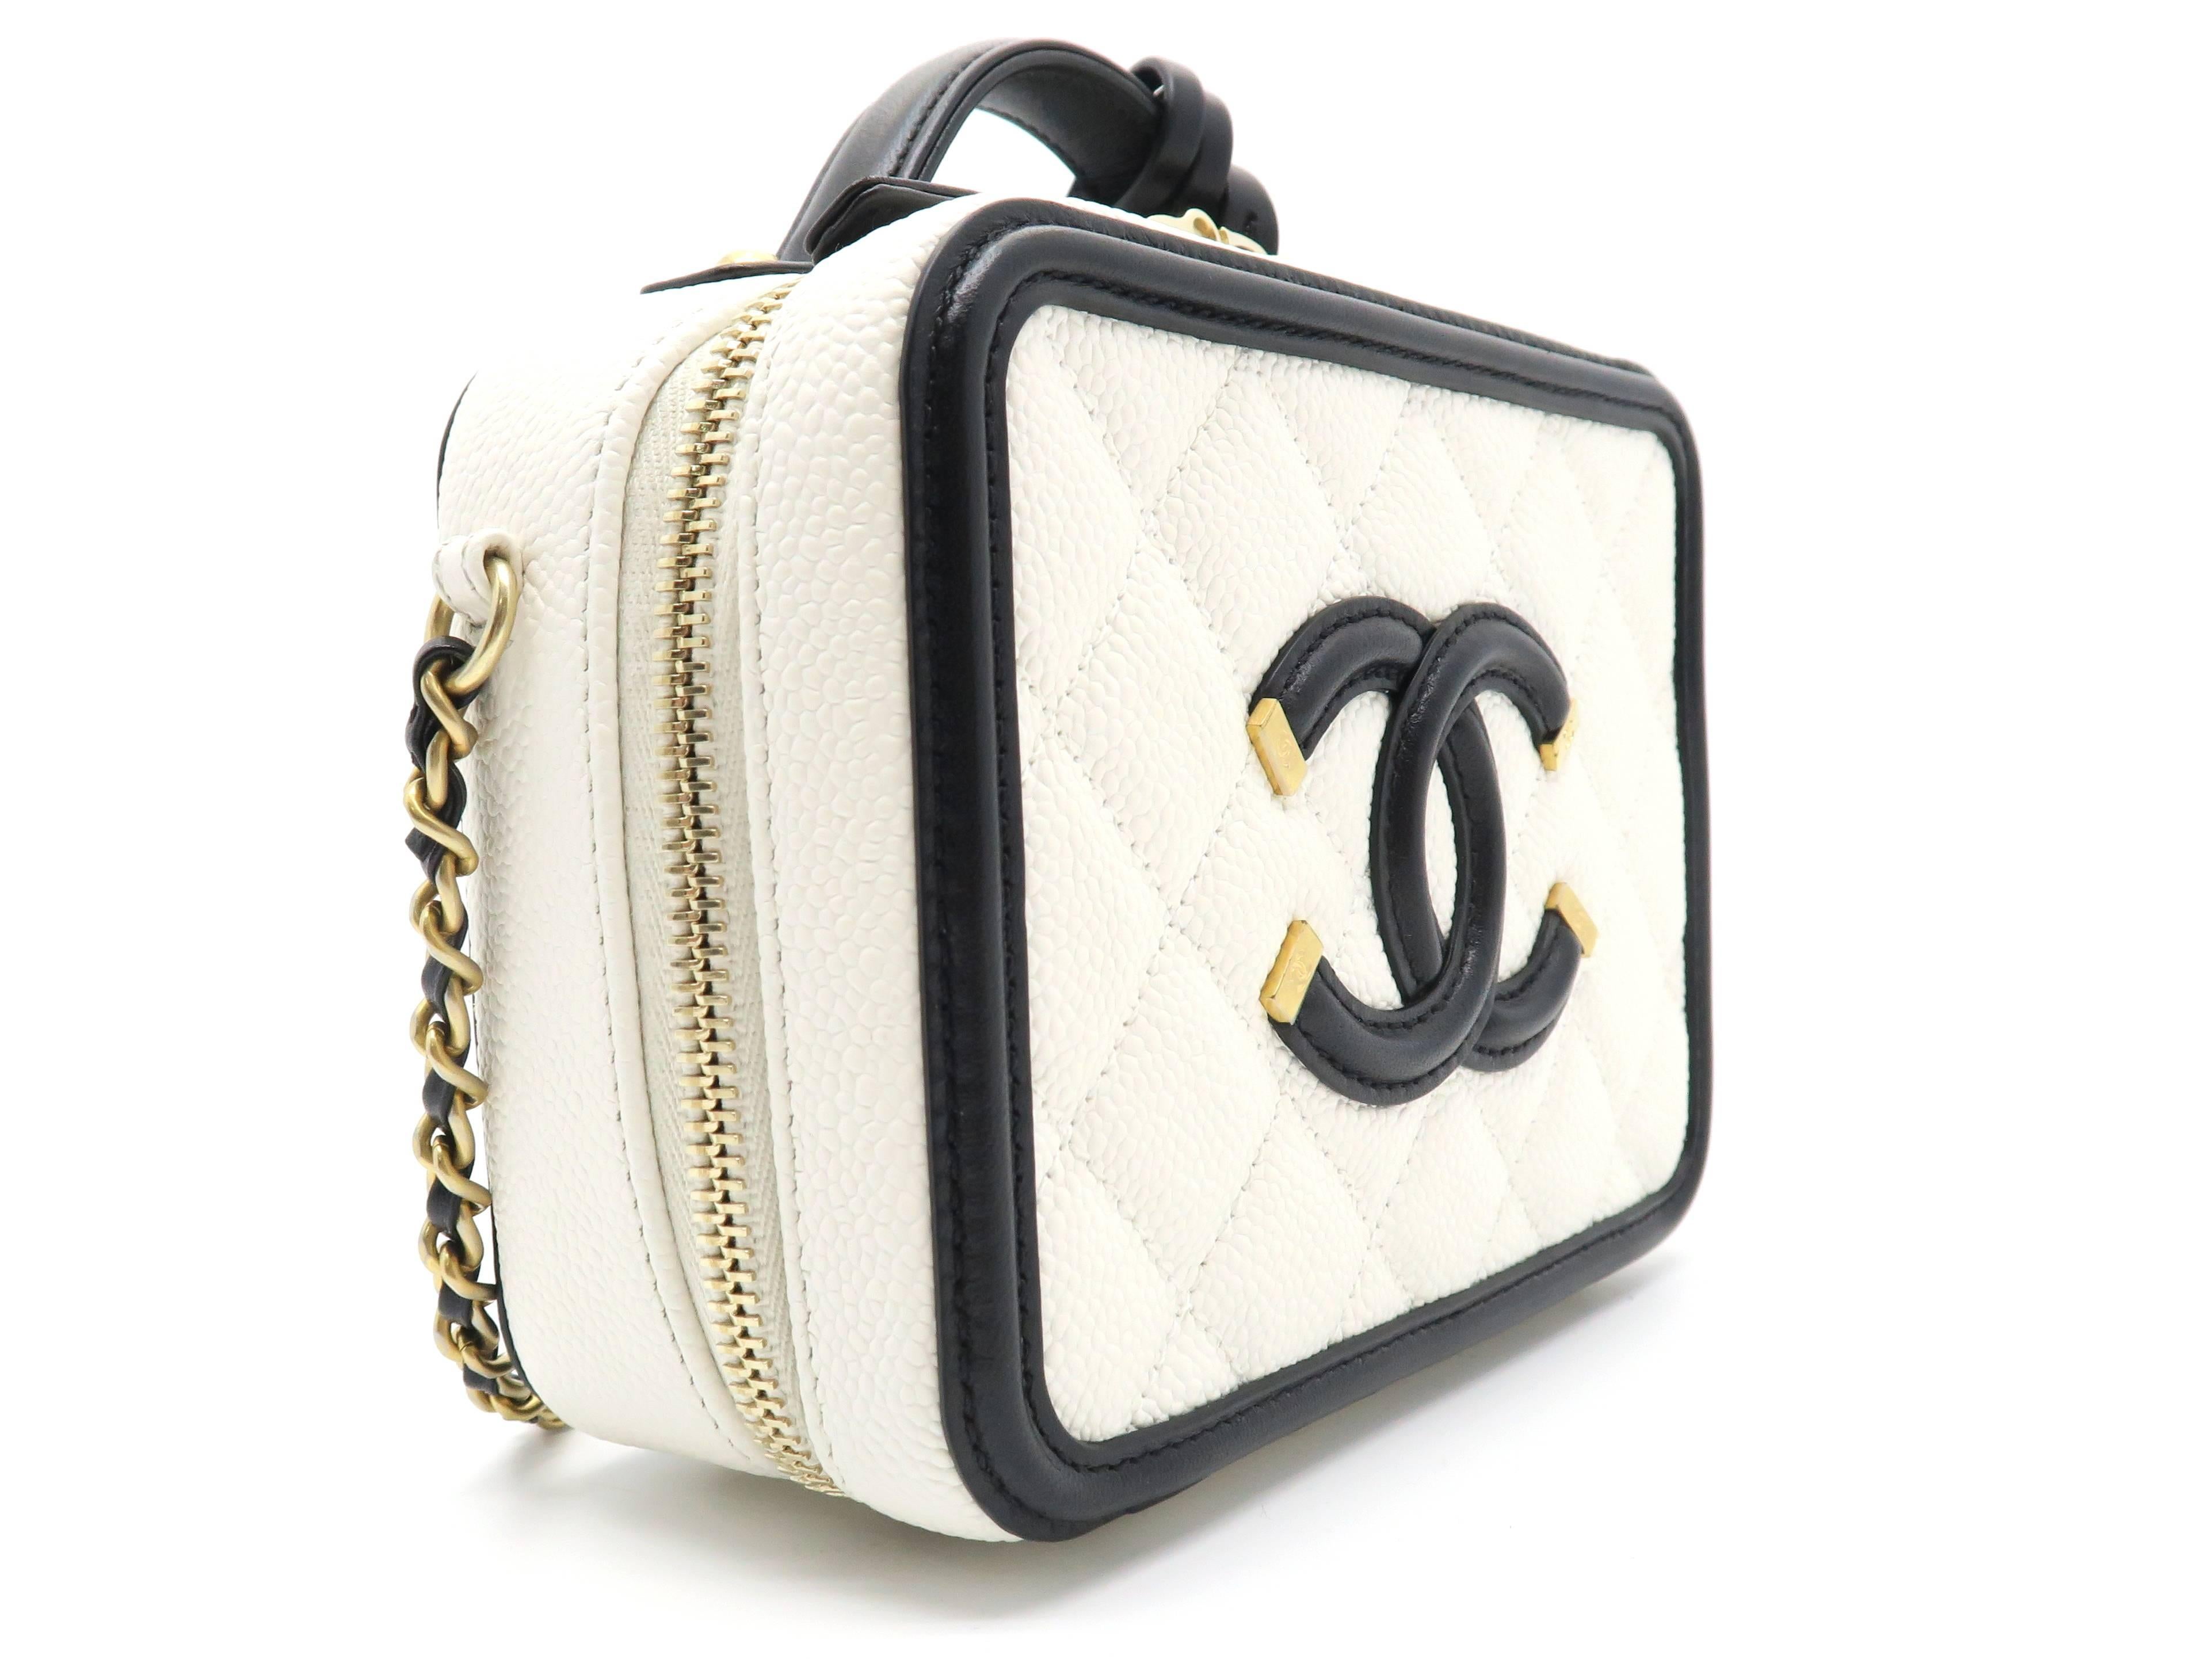 Color: White

Material: Caviar Leather

Condition: Rank N 
Overall: Brand New, Not Used
Surface: Good
Corners: Good
Edges: Good
Handles/Straps: Good
Hardware: Good

Dimension: W17 × H12 × D8cm（W6.6" × H4.7" × D3.1"）
Shoulder